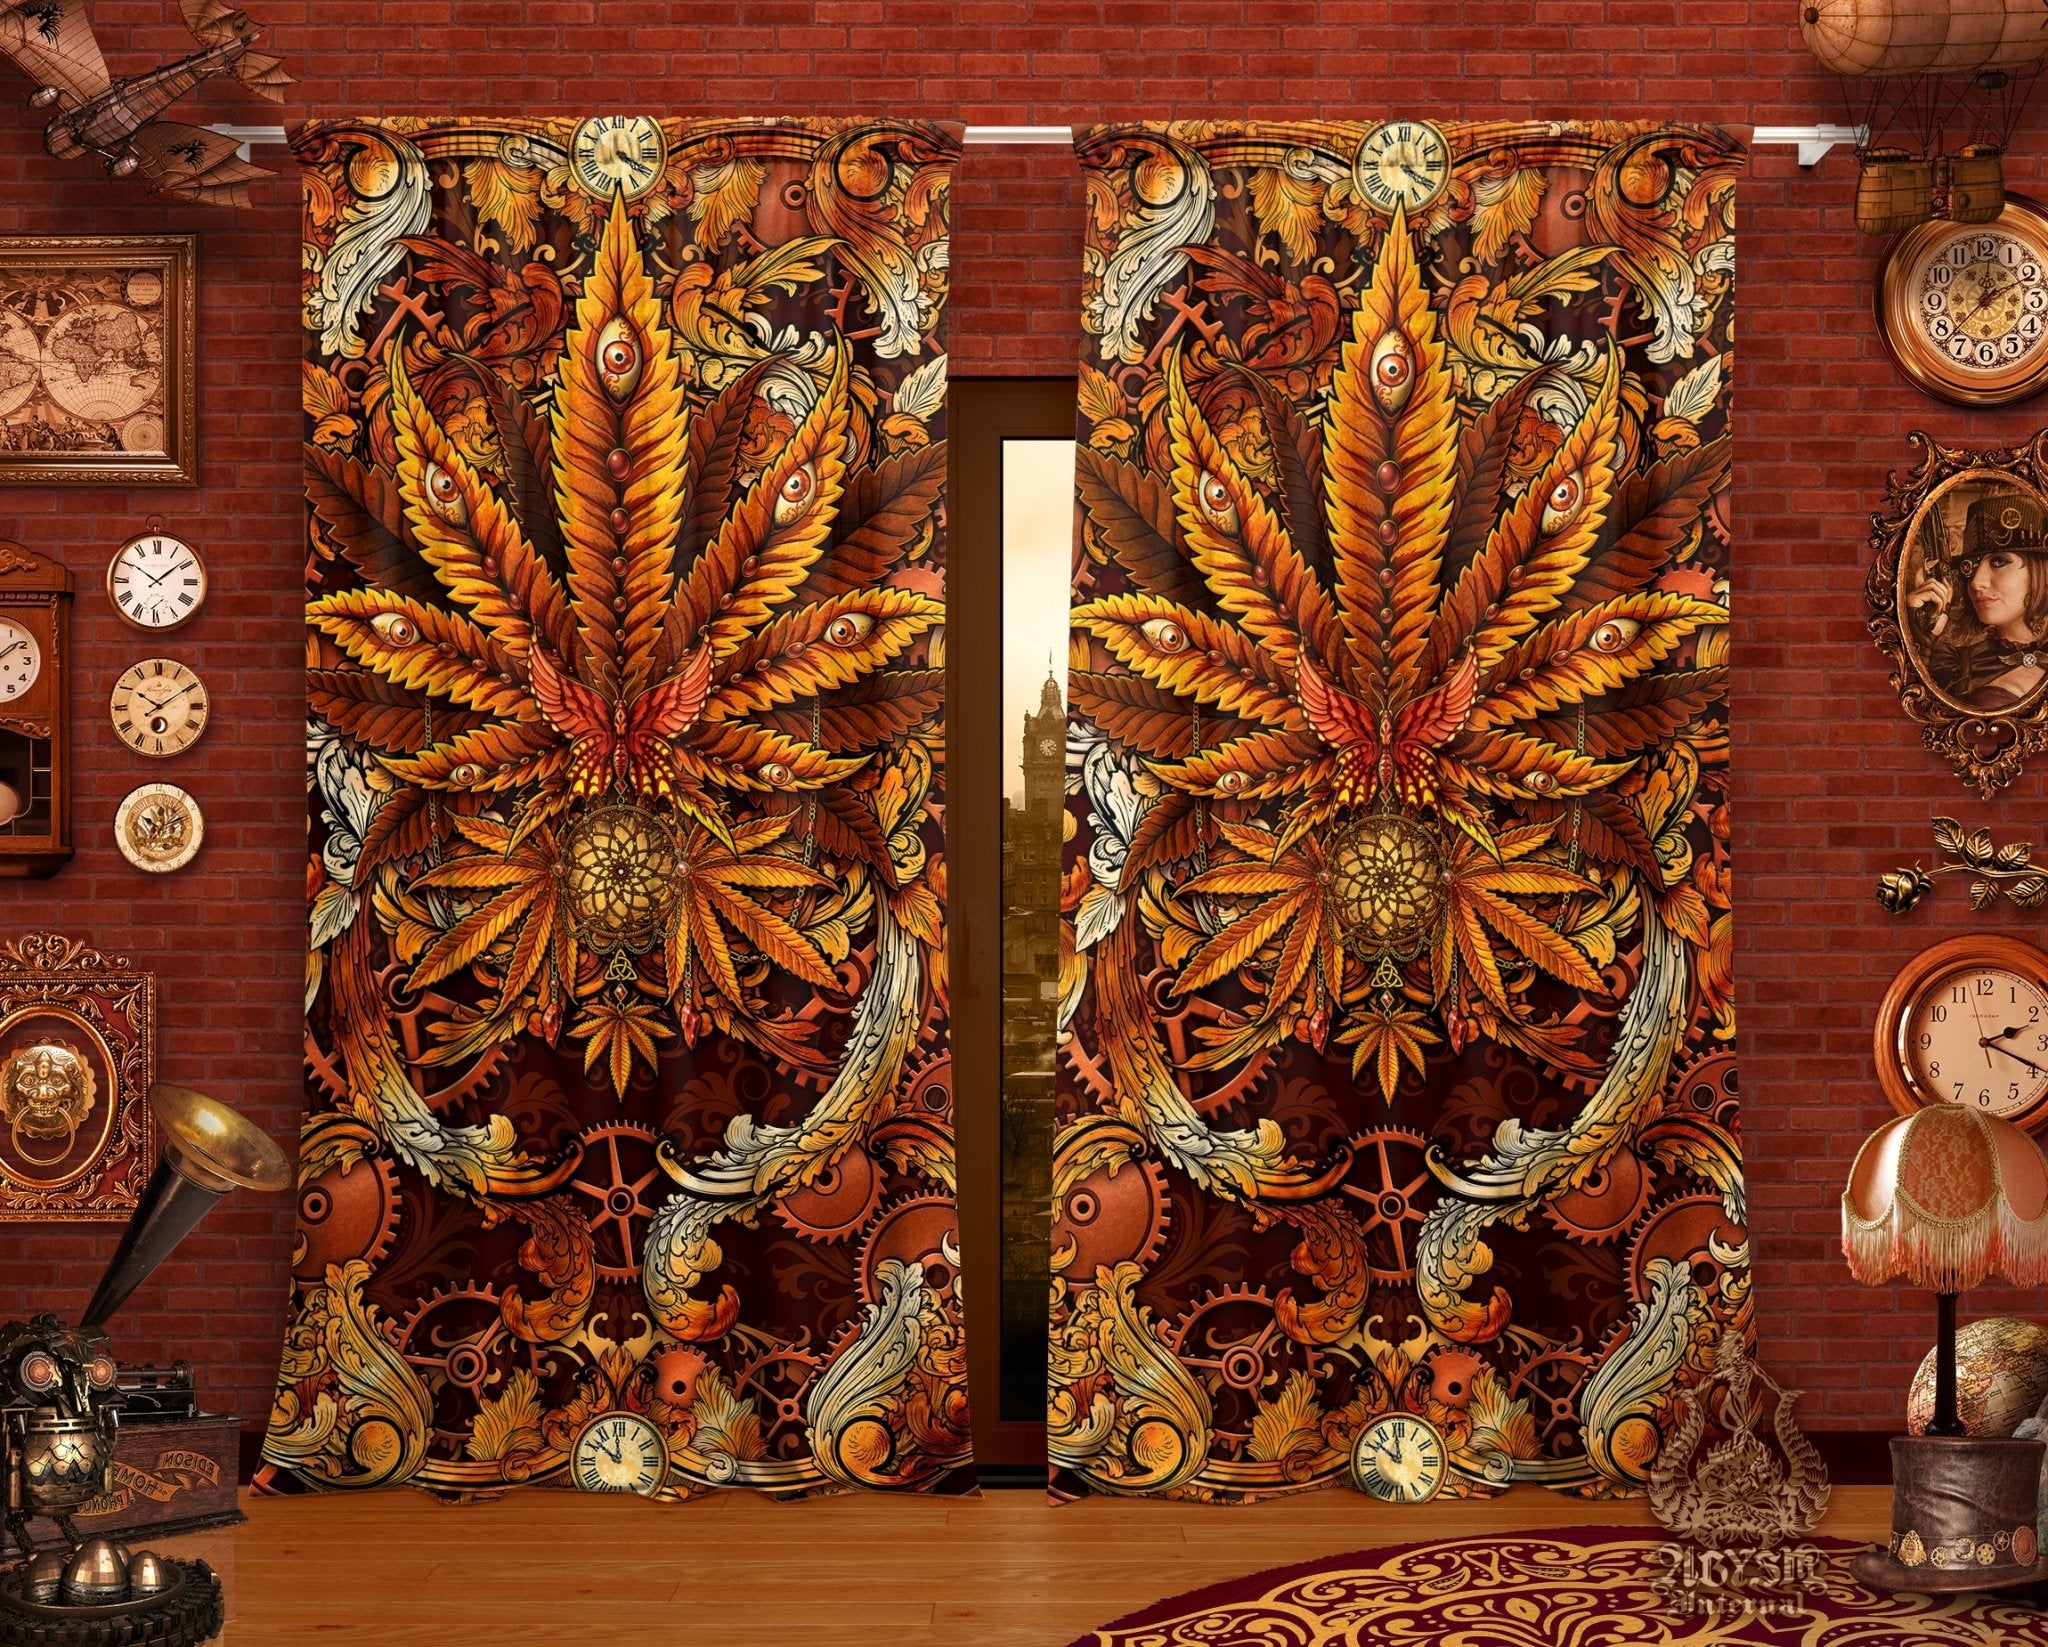 Weed Blackout Curtains, Cannabis Home and Shop Decor, Long Window Panels, Indie Print, 420 Room Art - Steampunk - Abysm Internal